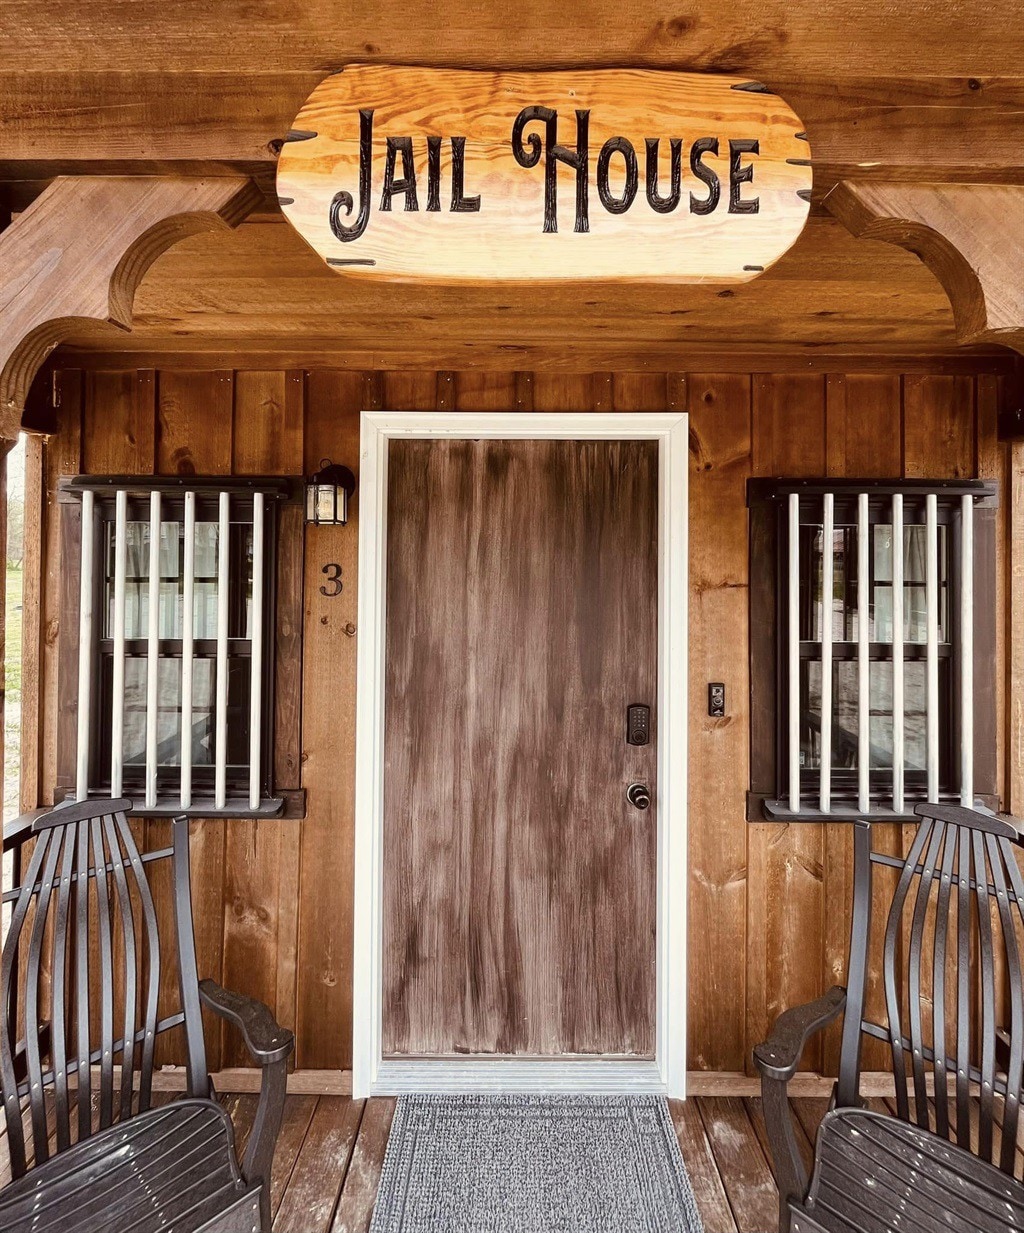 The County Jail- An Old West Experience!